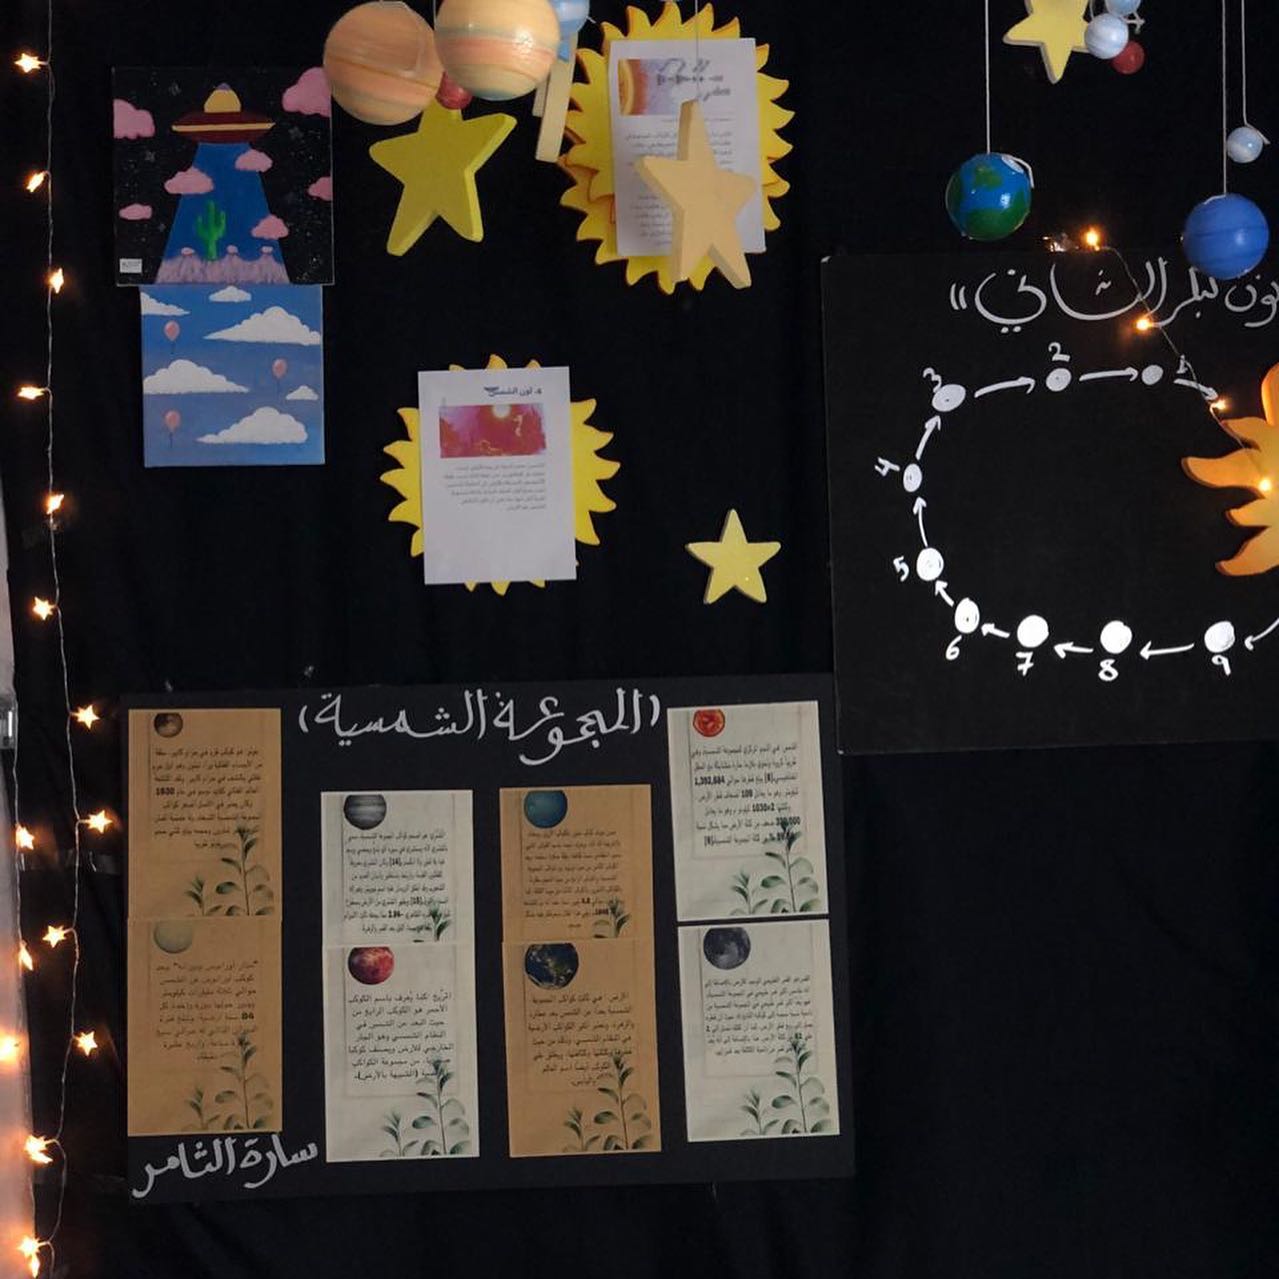 The Moon Towards the Stars Exhibition to activate the World Space Week, under the supervision of teacher Walaa Dahlan.